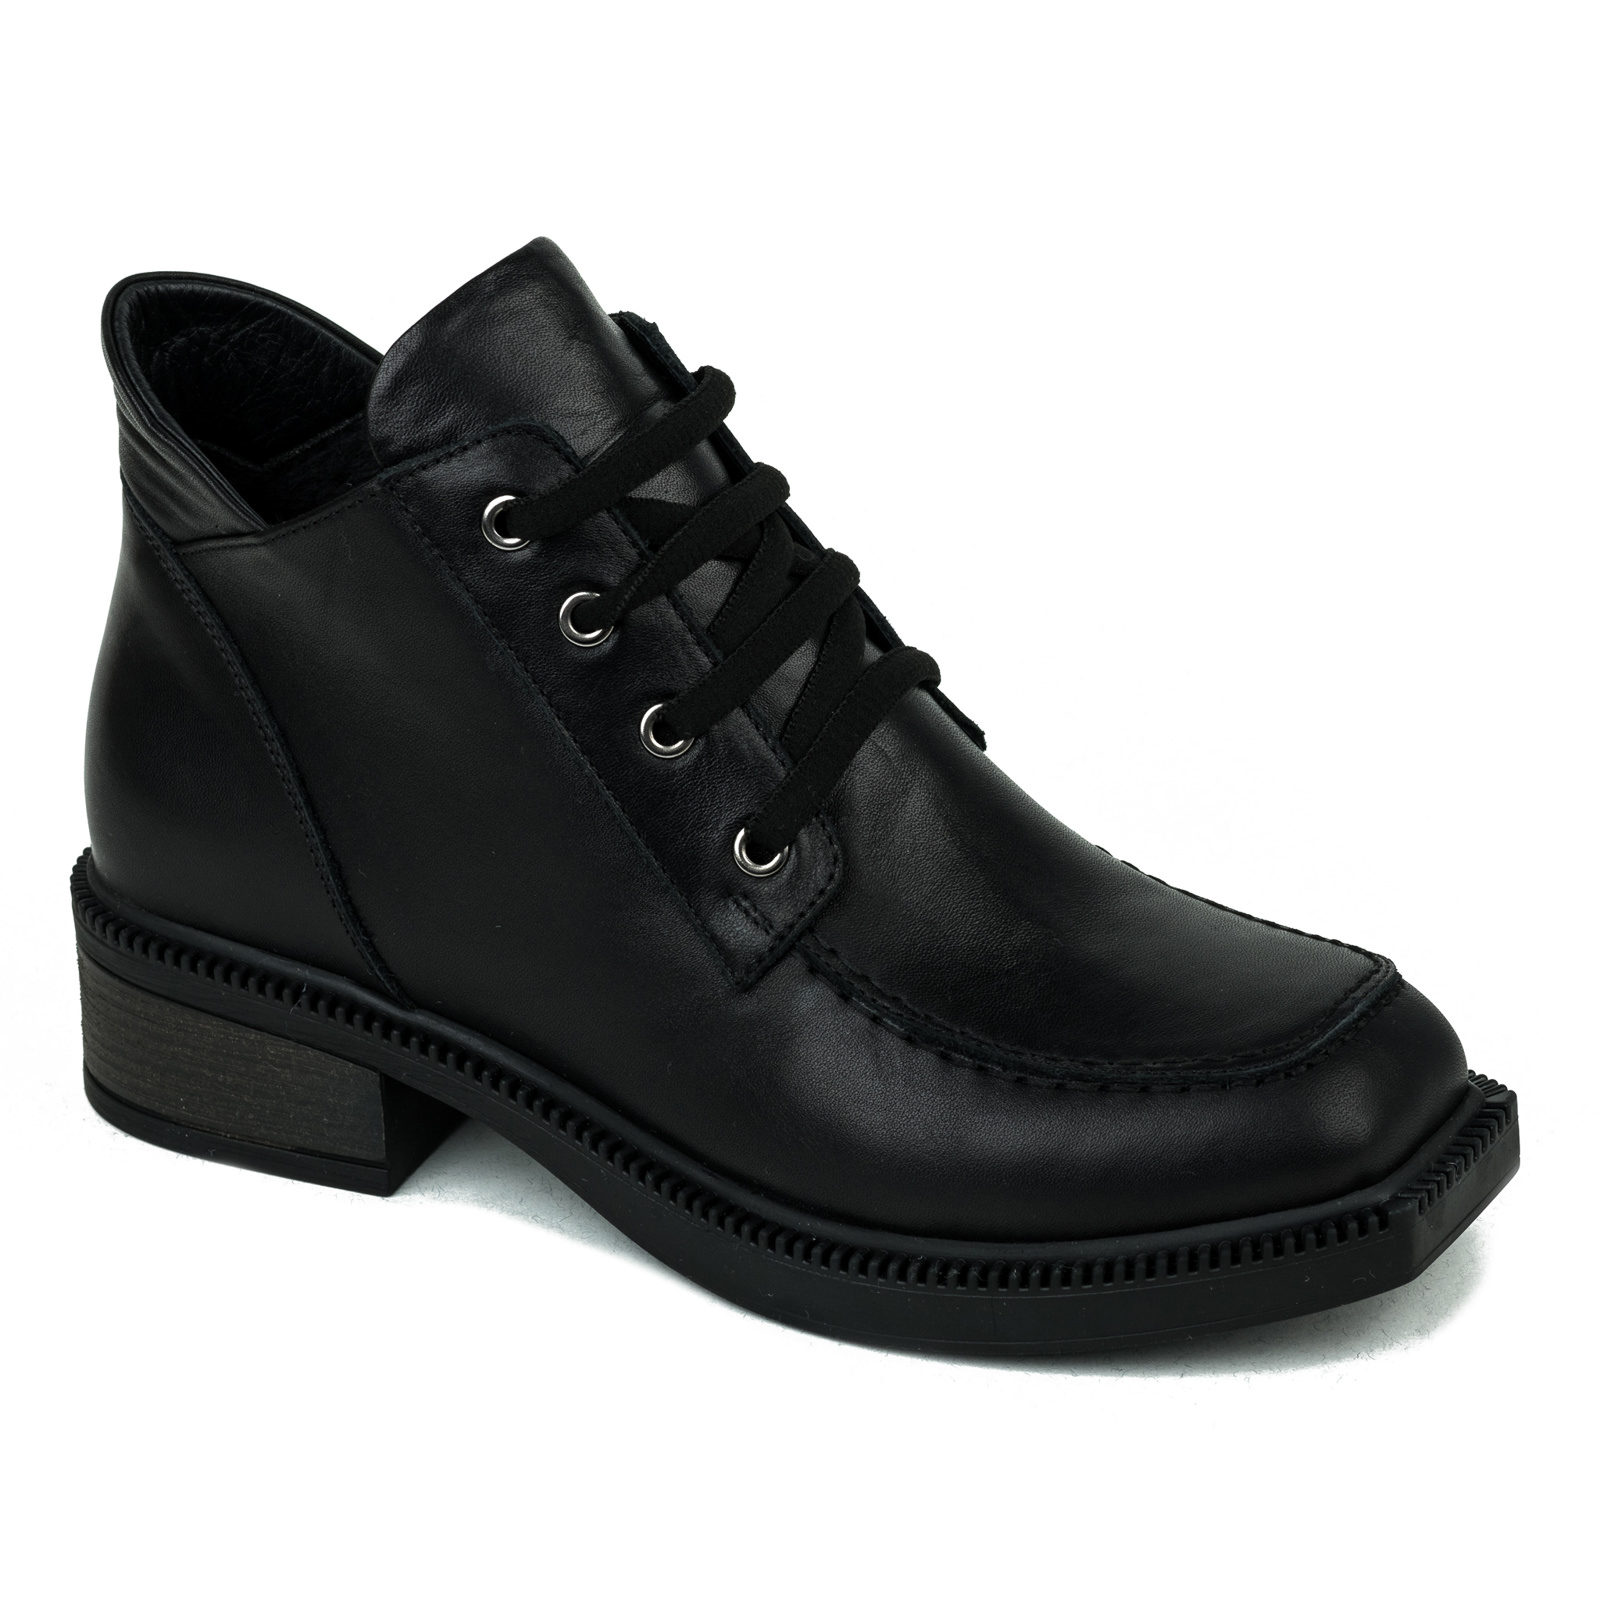 Leather ankle boots URSULA - BLACK